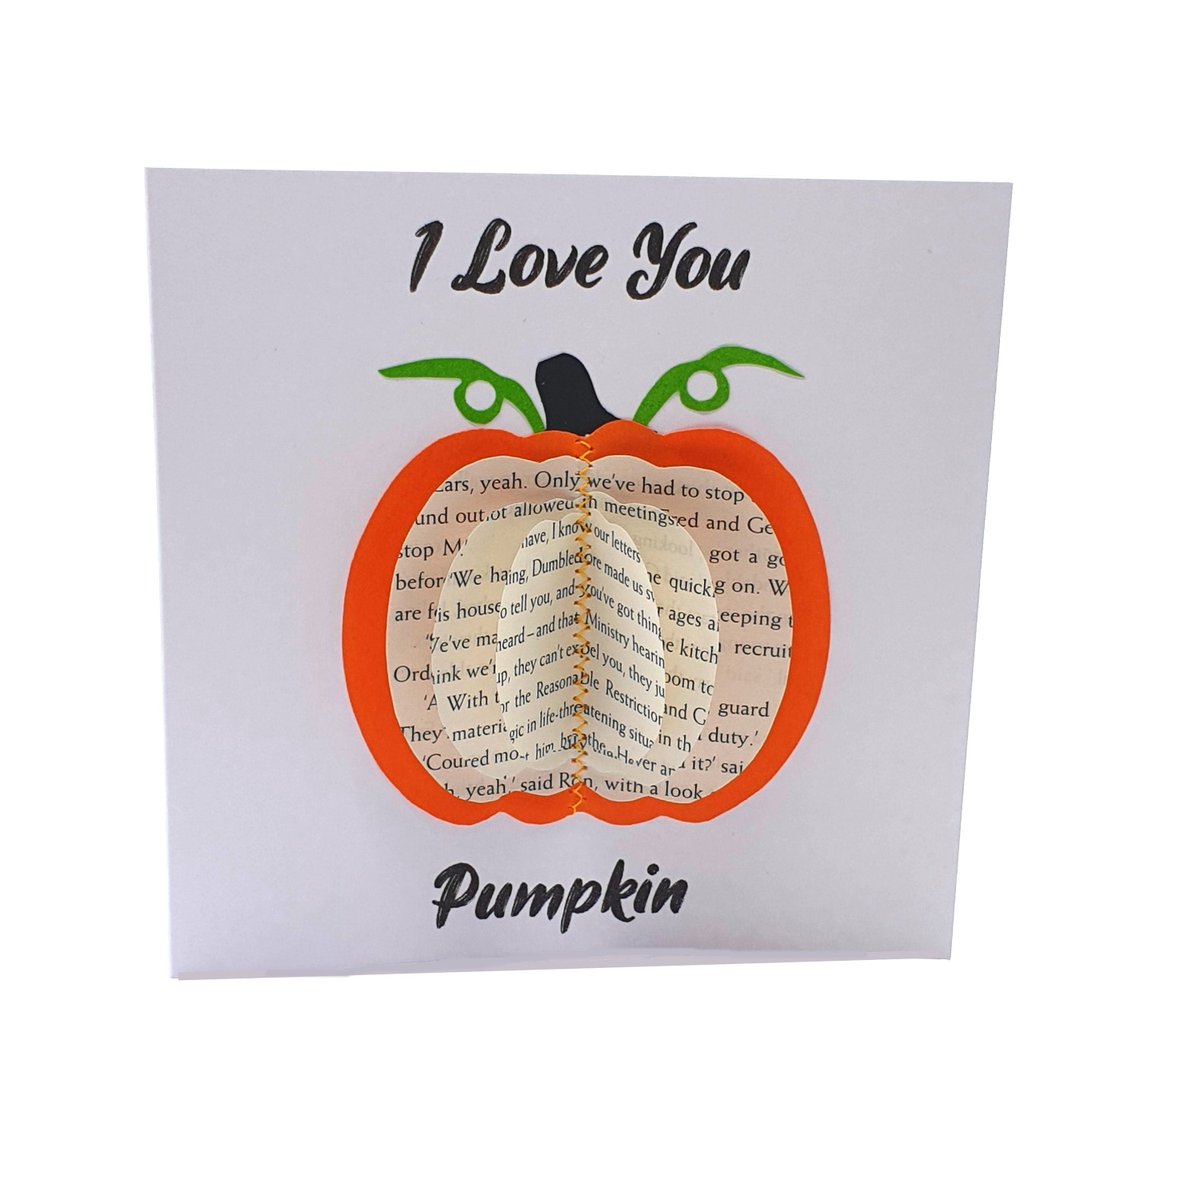 Pumpkin Card Gift creatoncrafts.com/products/pumpk… #Shopify #CreatonCrafts #mhhsbd #HandmadePaper